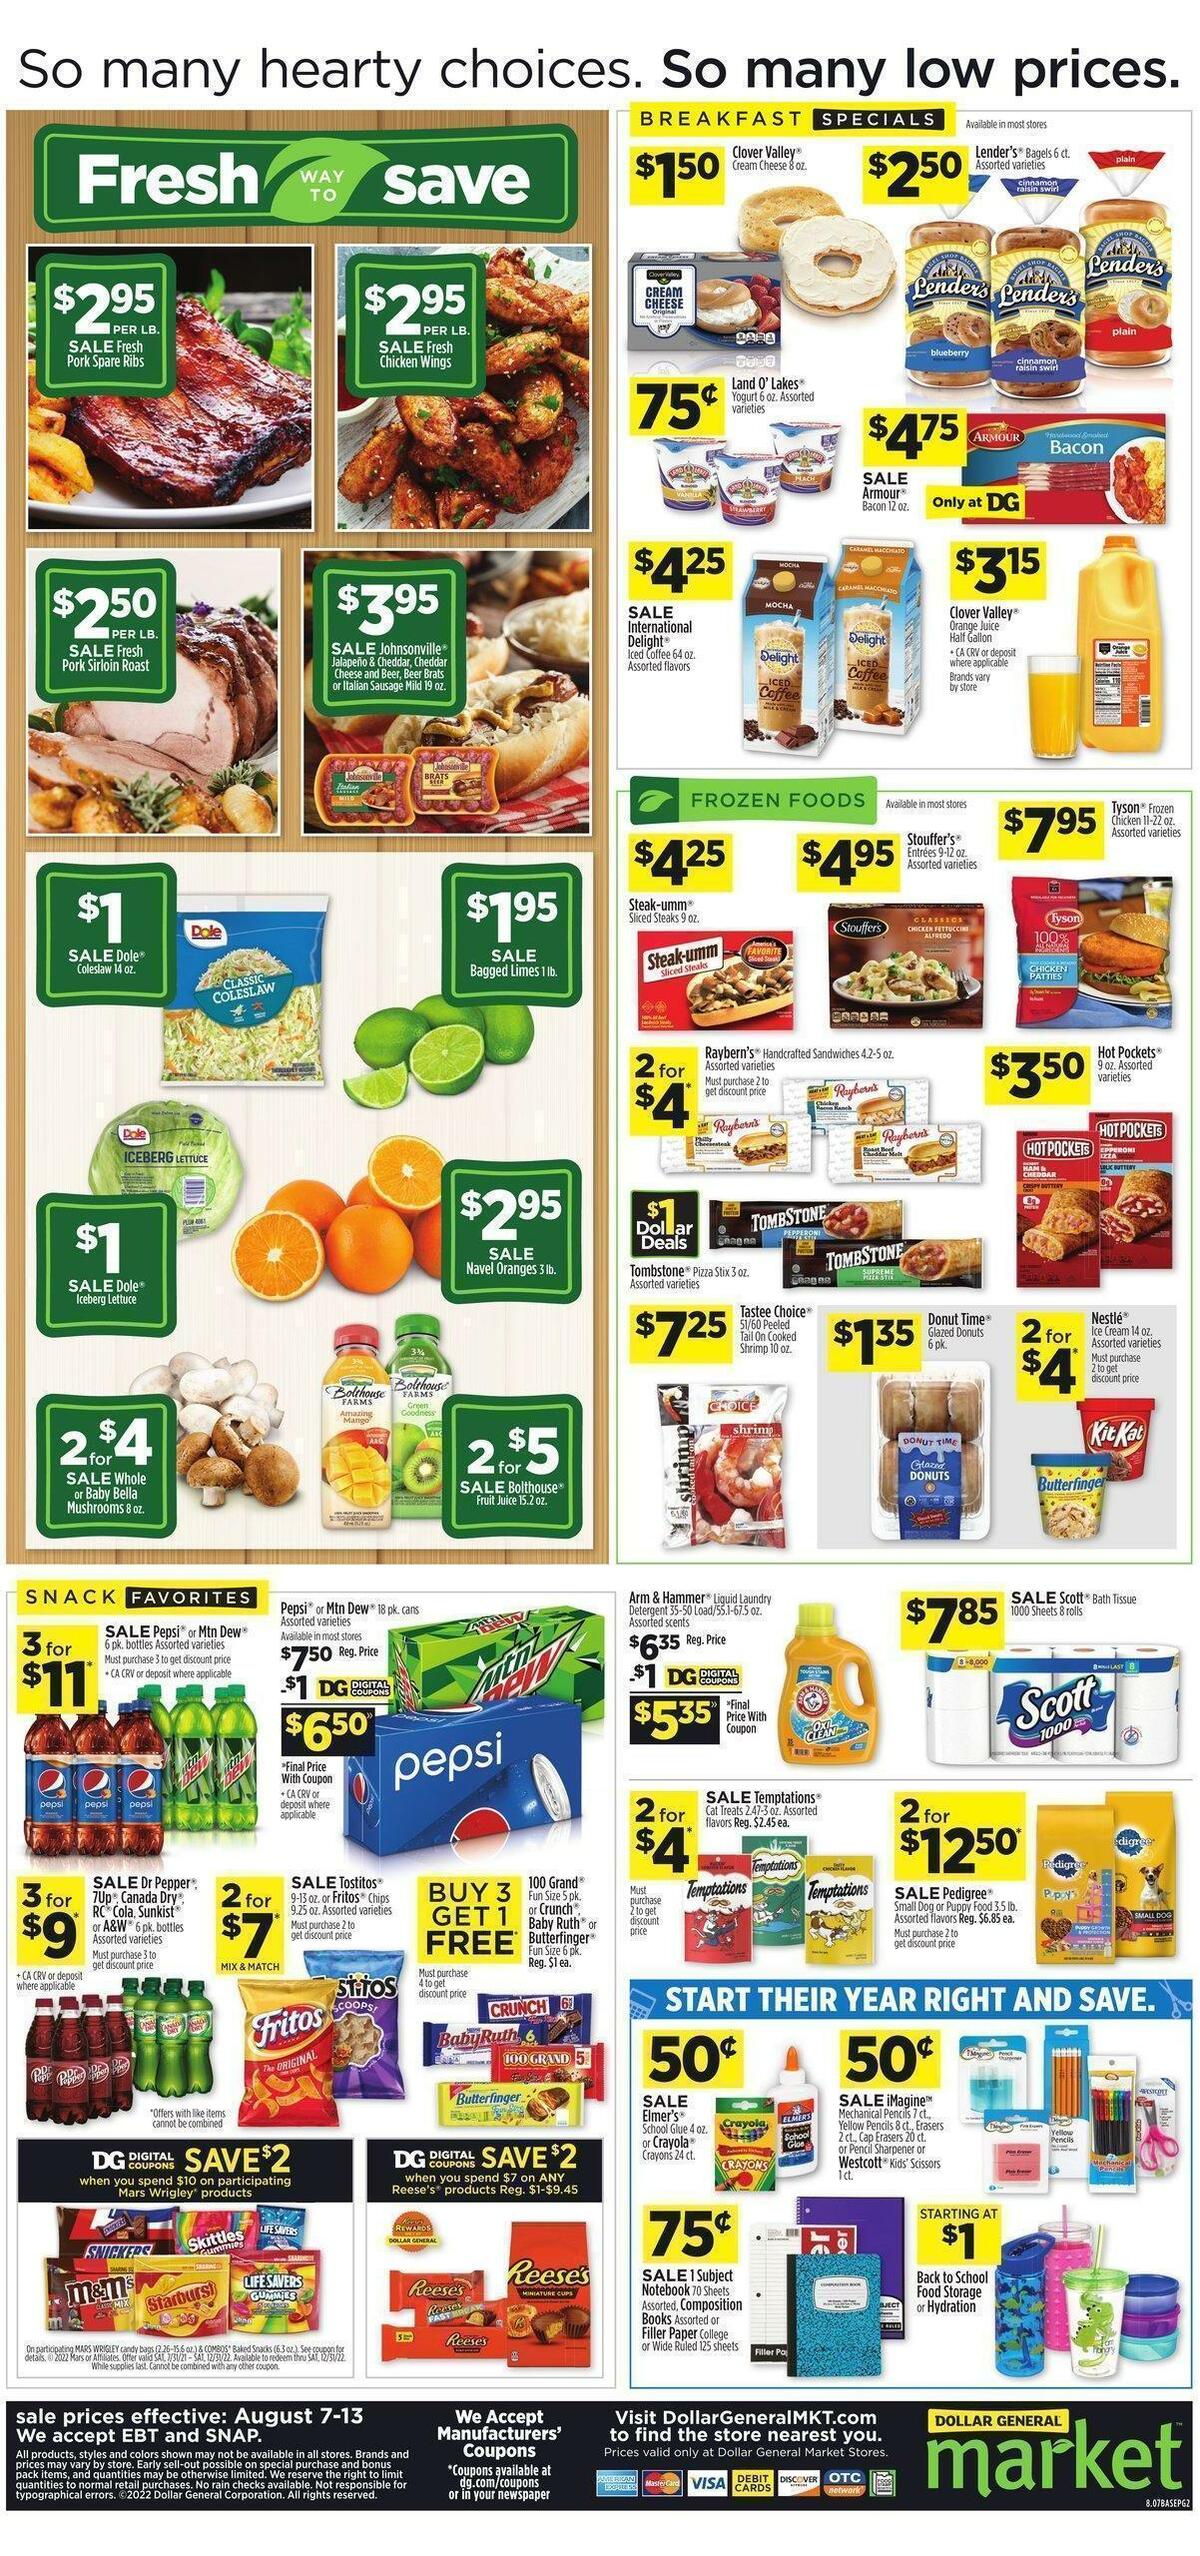 Dollar General Market Ad Weekly Ad from August 7